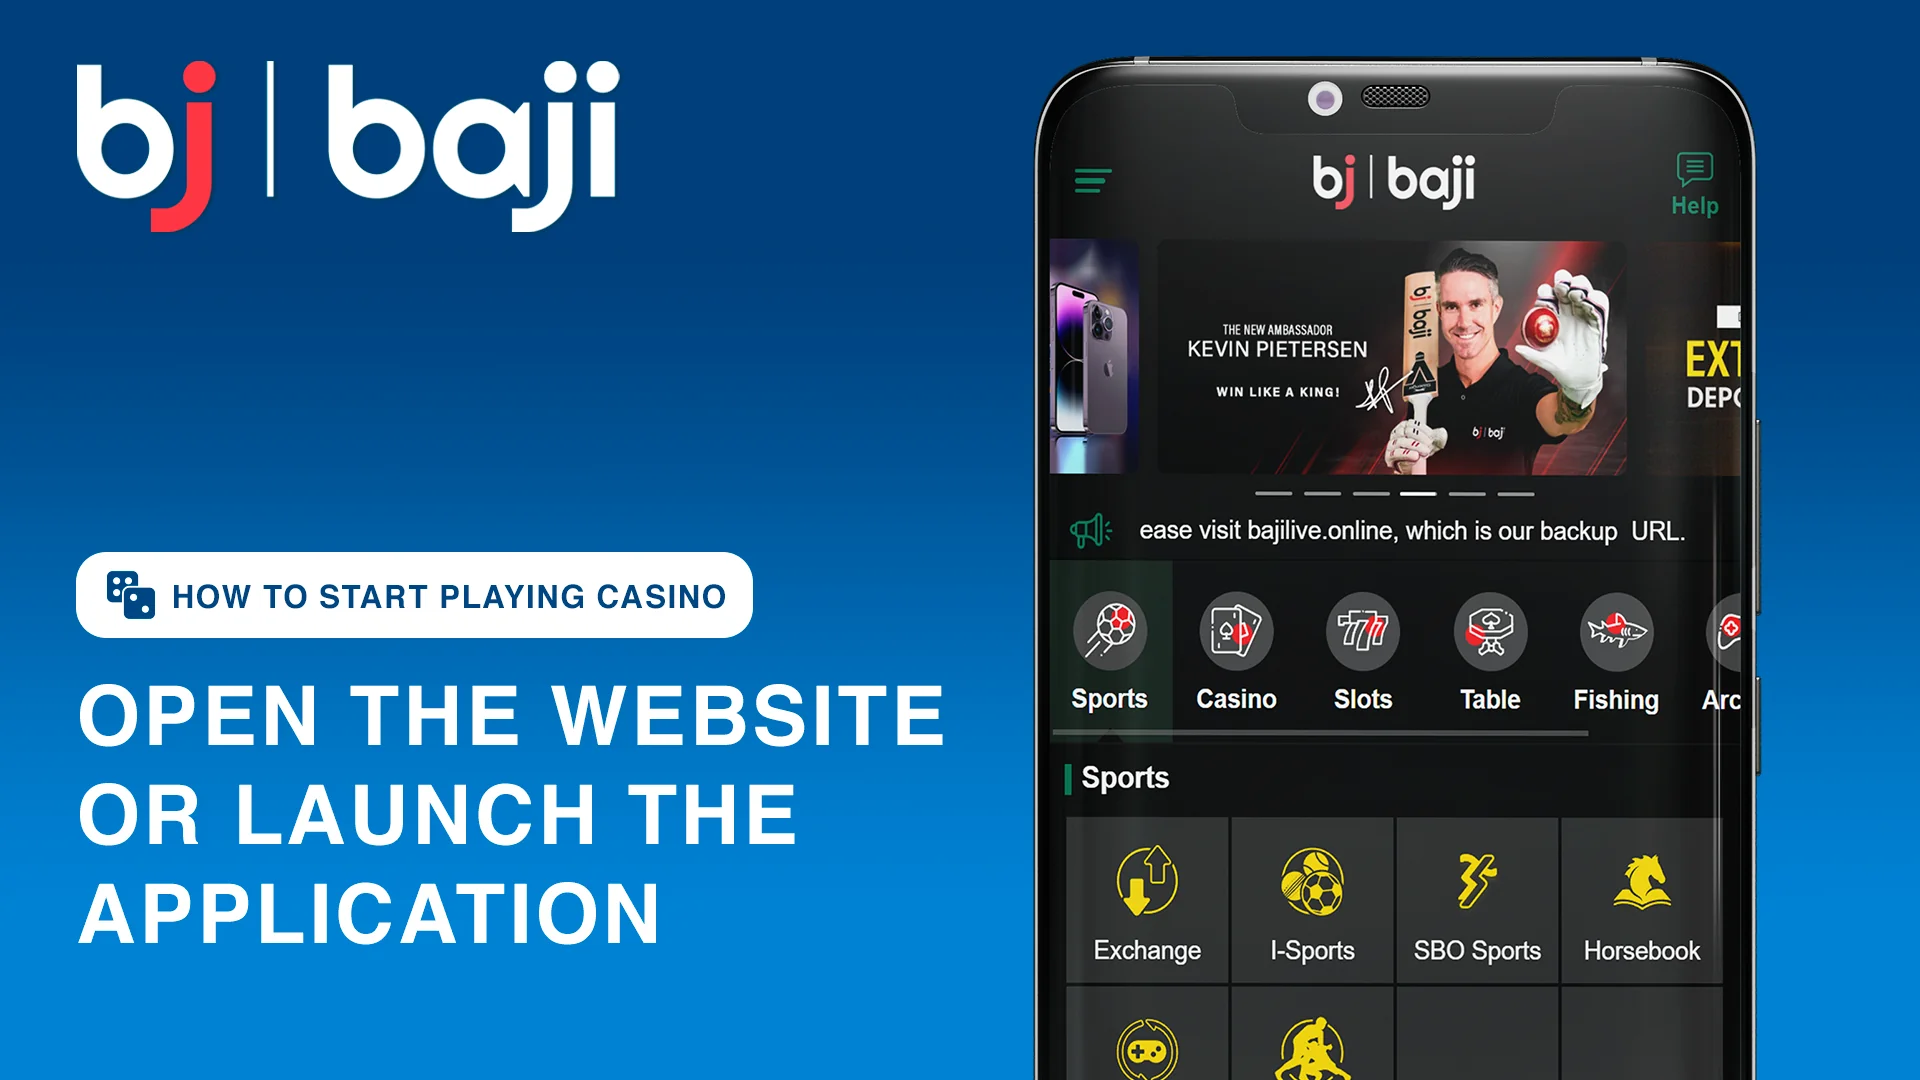 To start playing the casino, open Baji Official Website or App